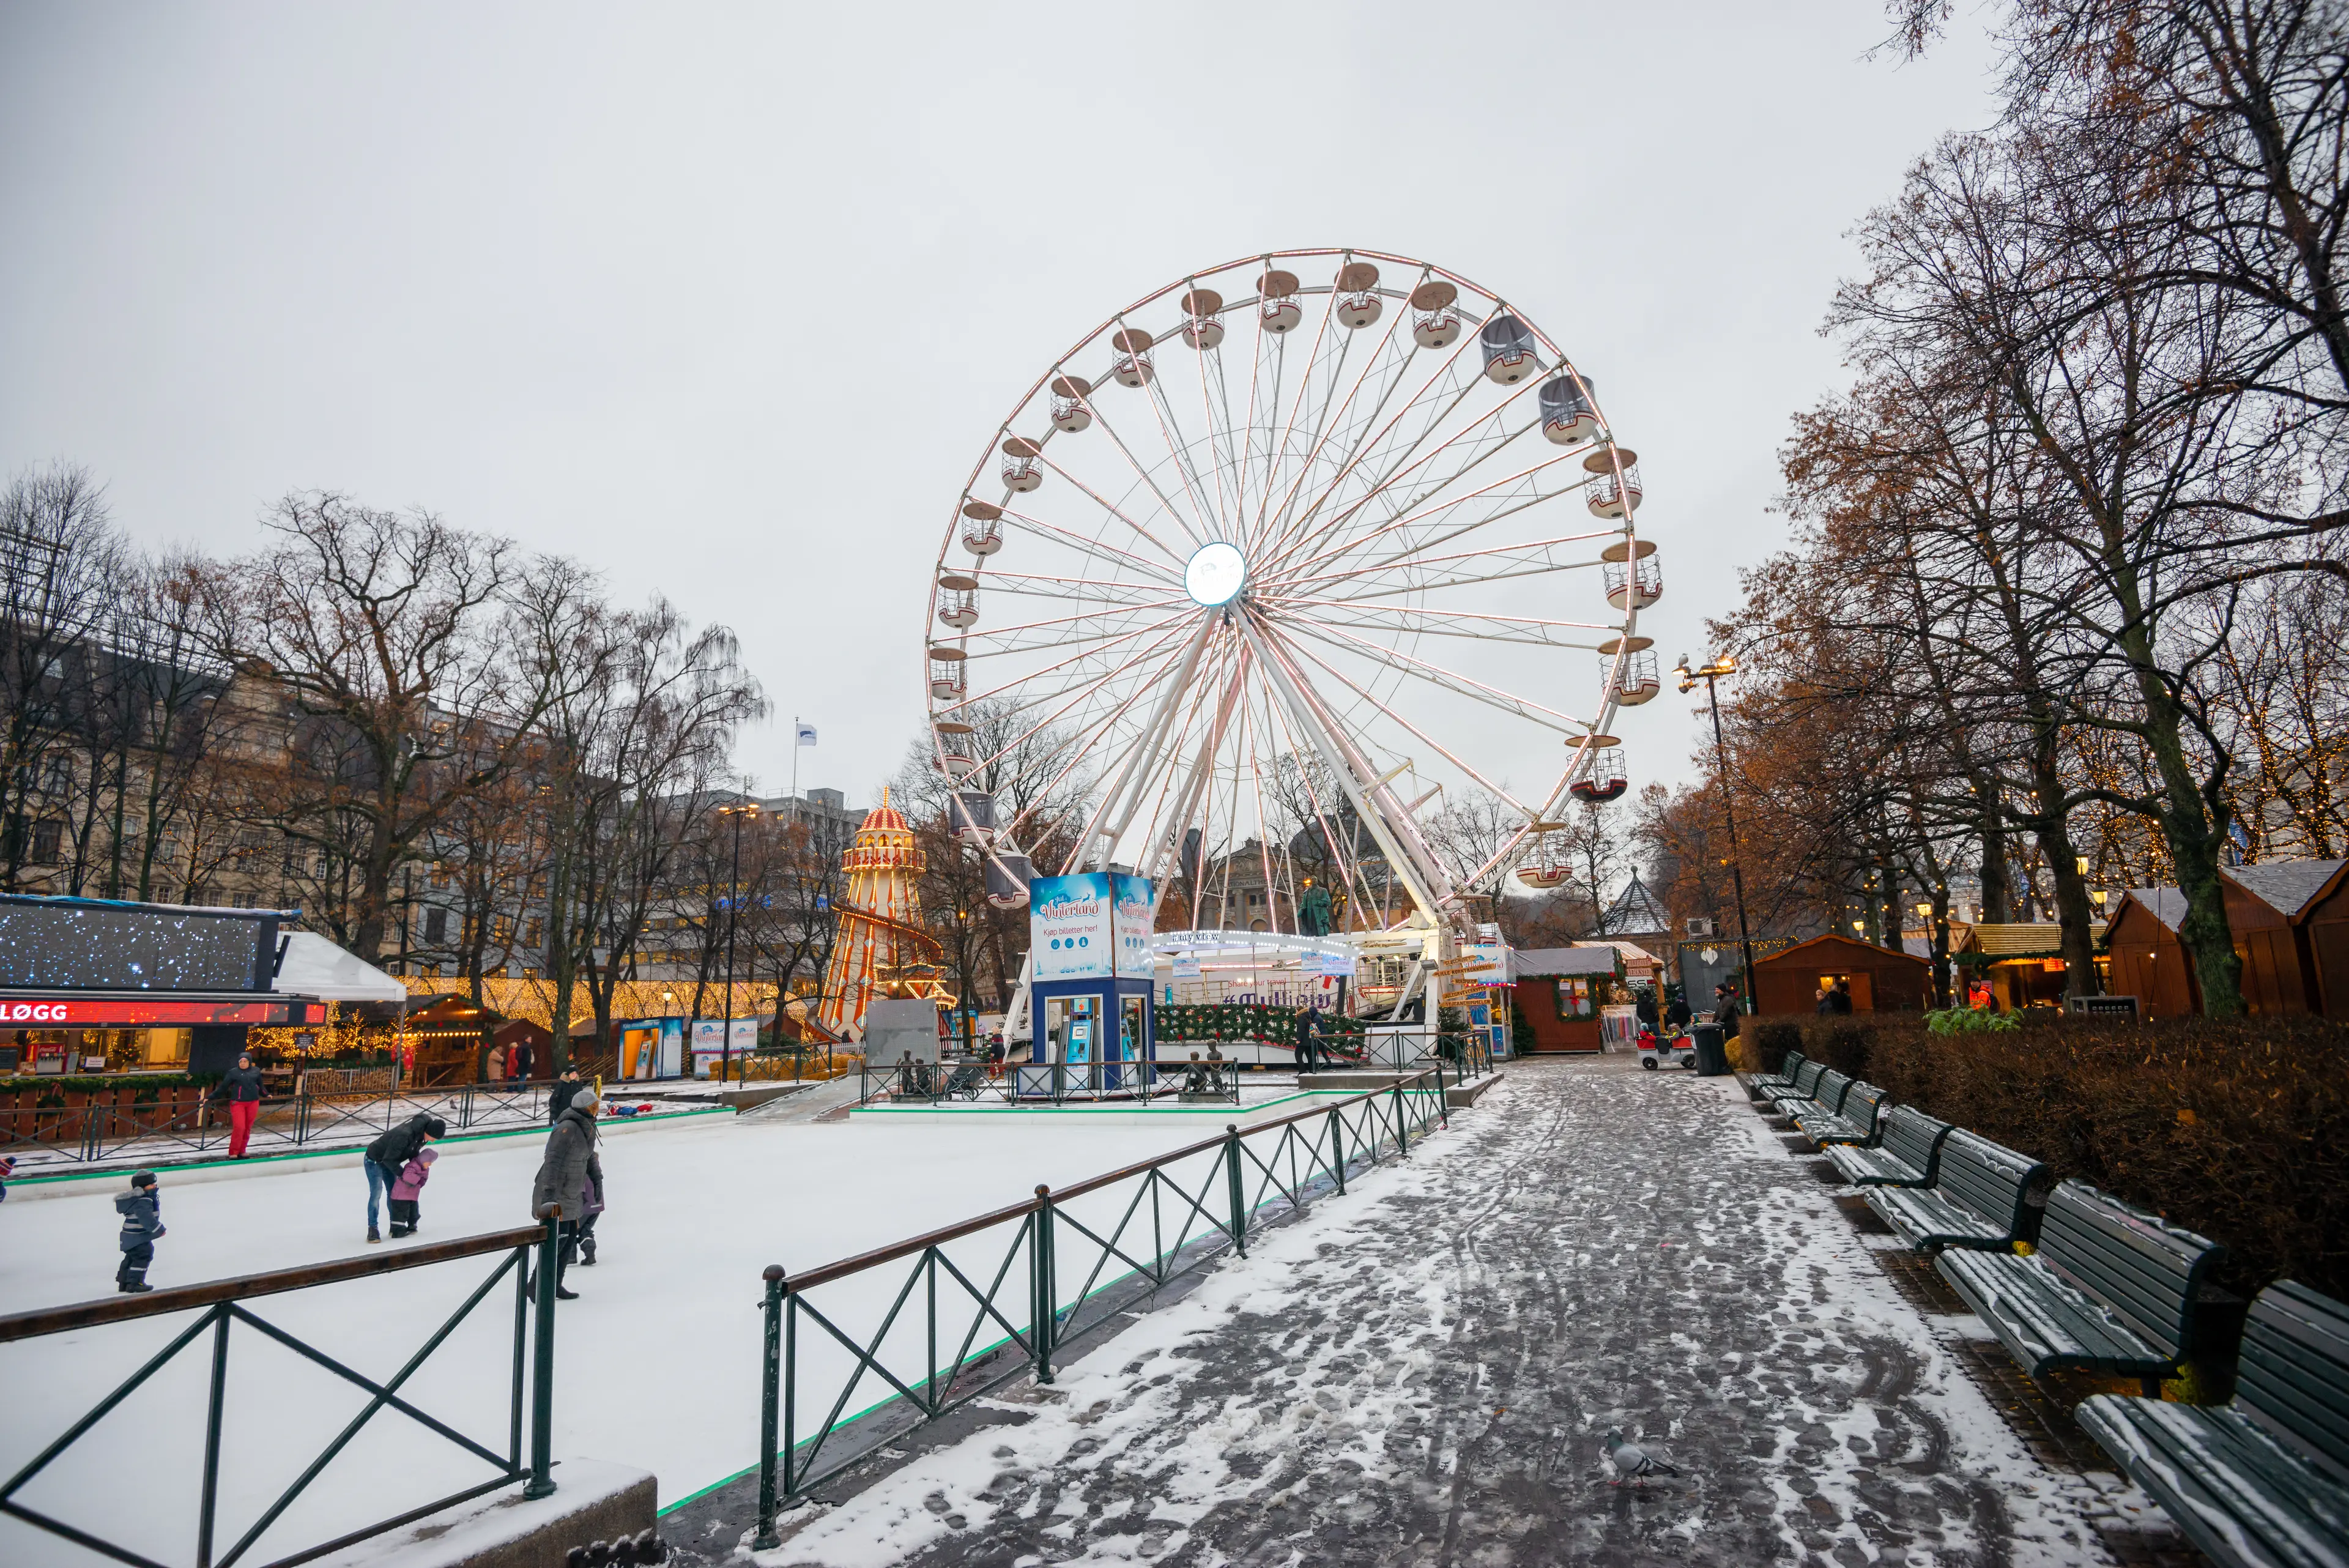 Ice skate and ferris wheel on a winter day